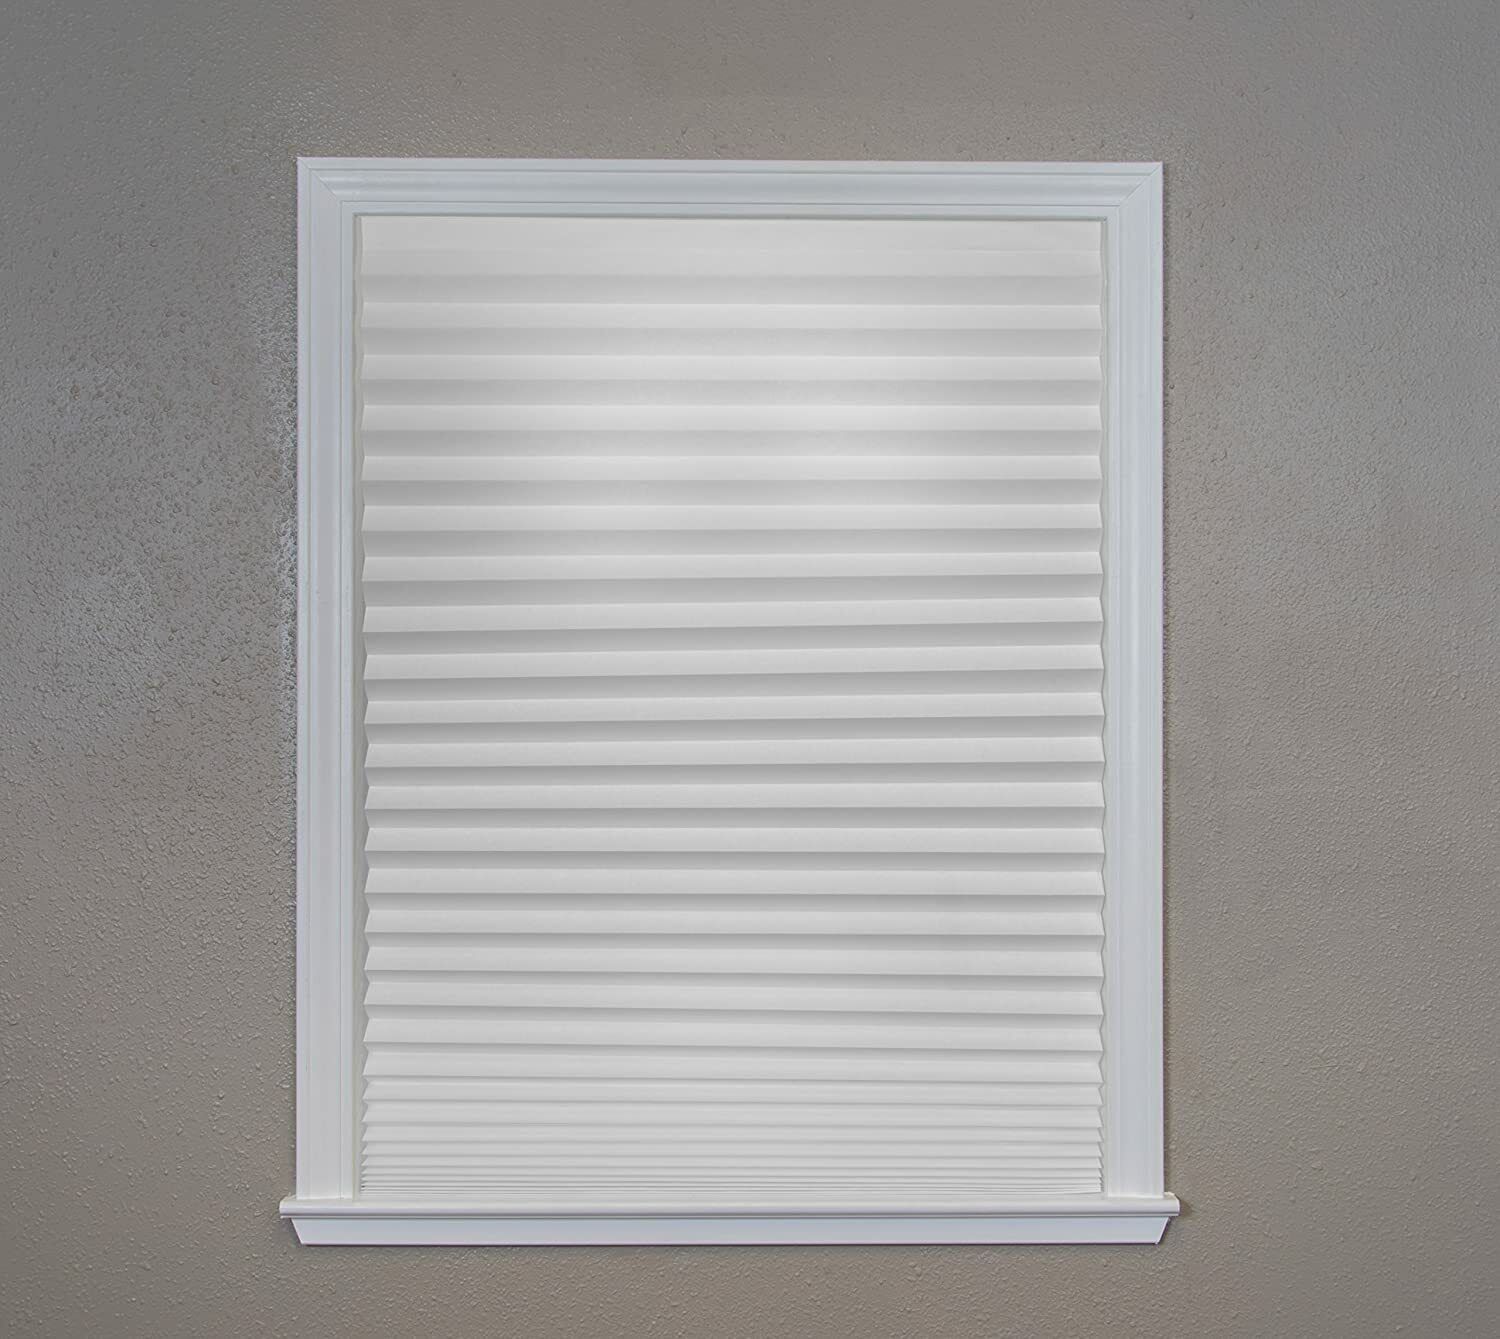 6 Pack,36" x 72” Light Filtering Pleated Paper Shades Window Blinds Sun UV Block Does not apply 1616204 - фотография #10